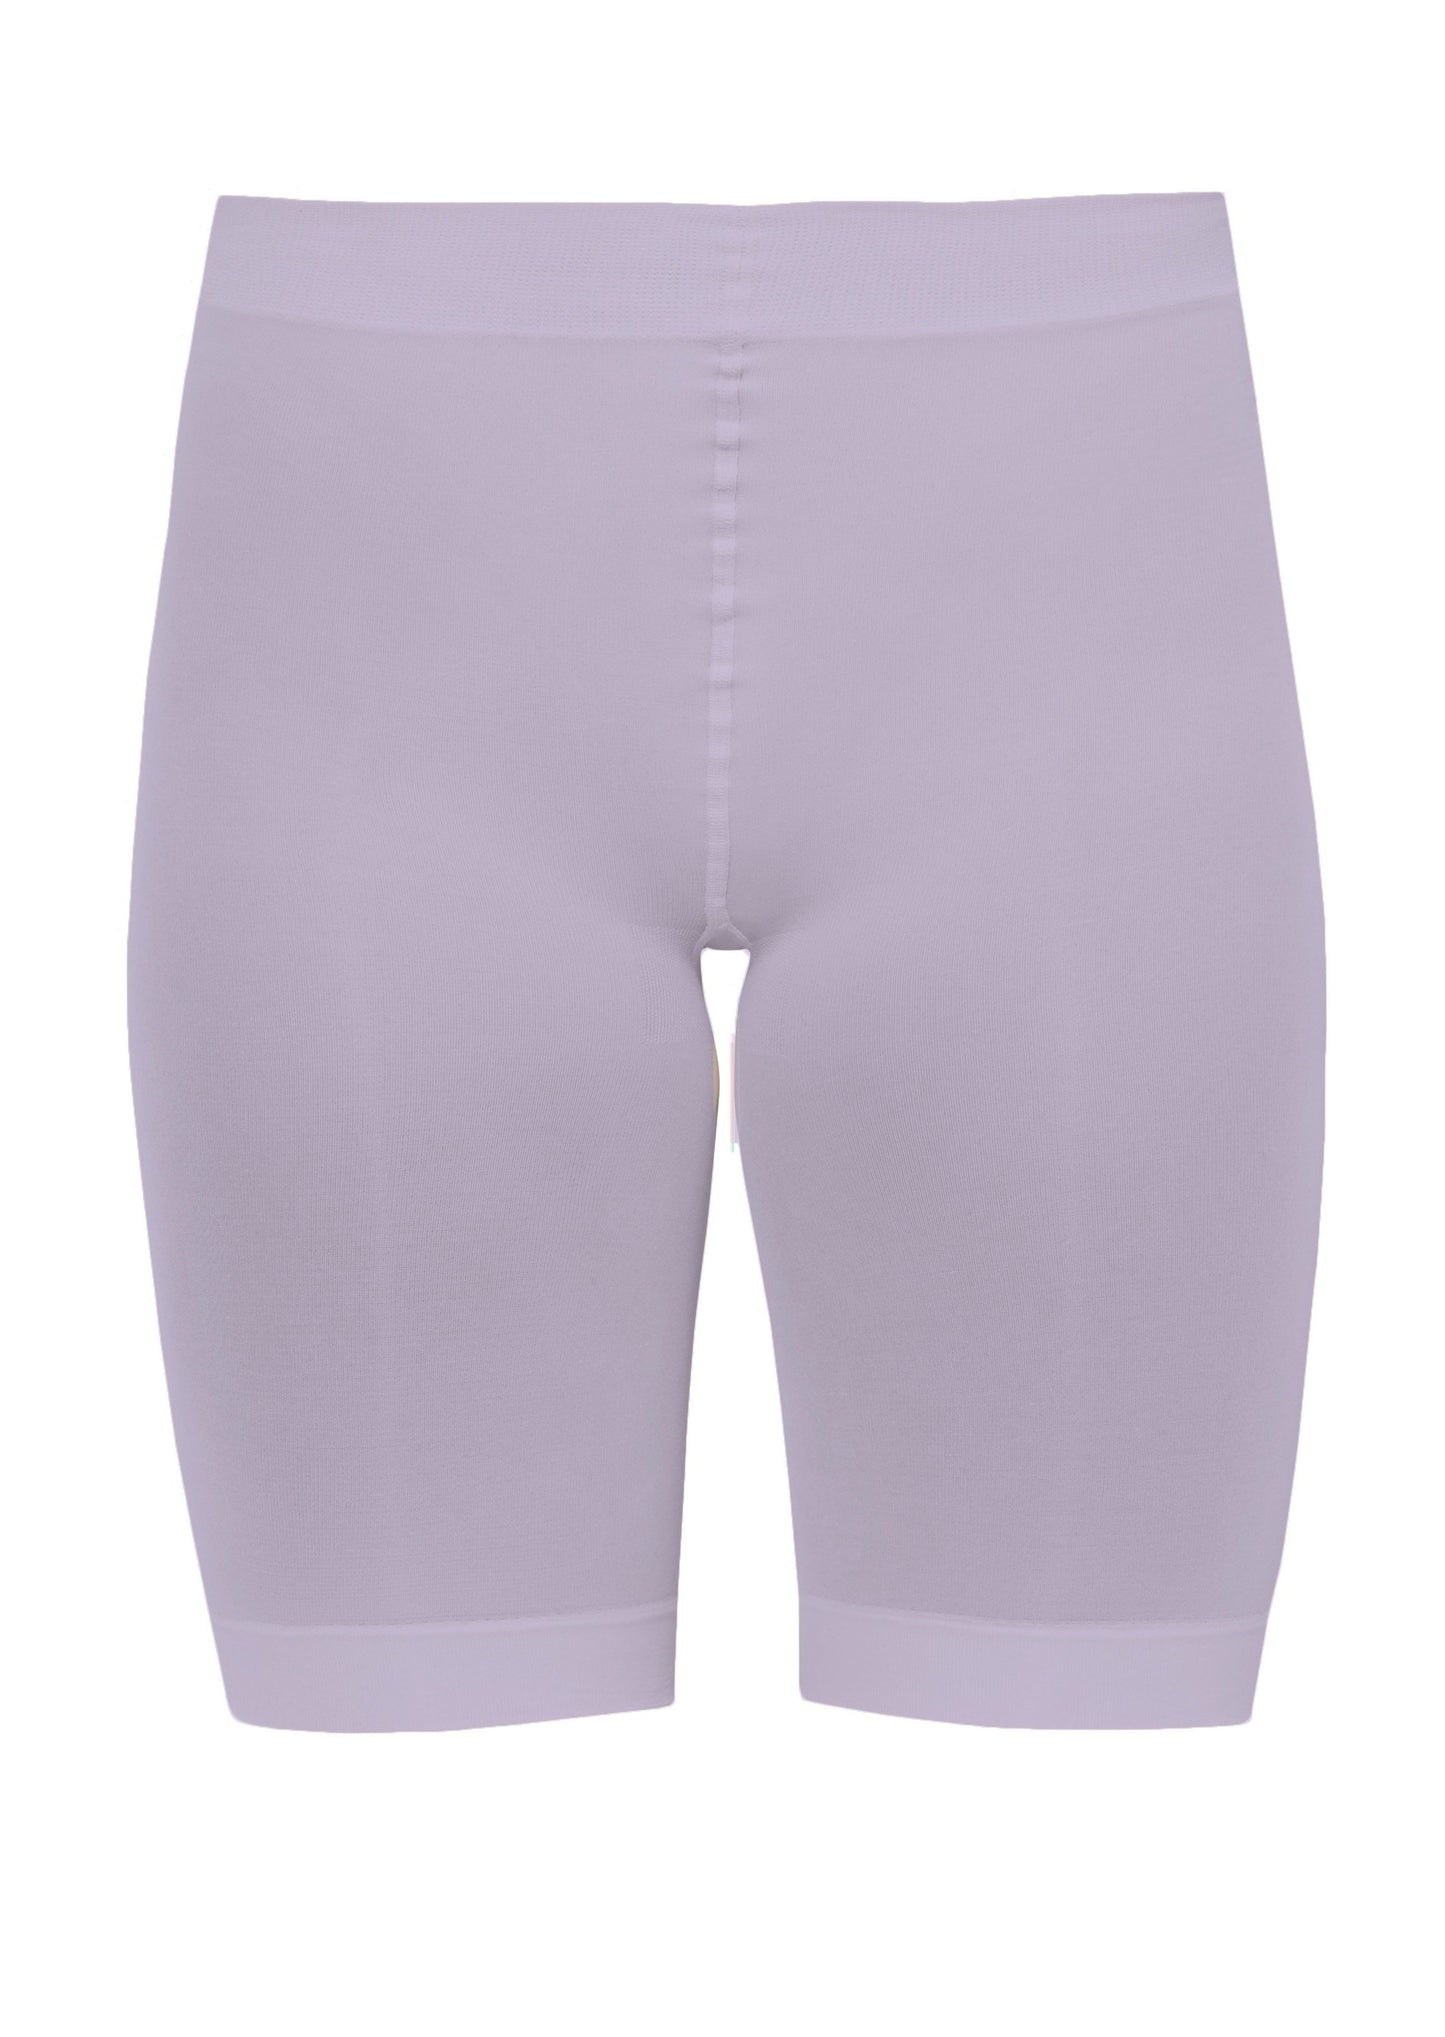 Sneaky Fox Microfibre Shorts - Lilac purple soft matte opaque knee length bicycle short tights with cotton gusset and flat seams.